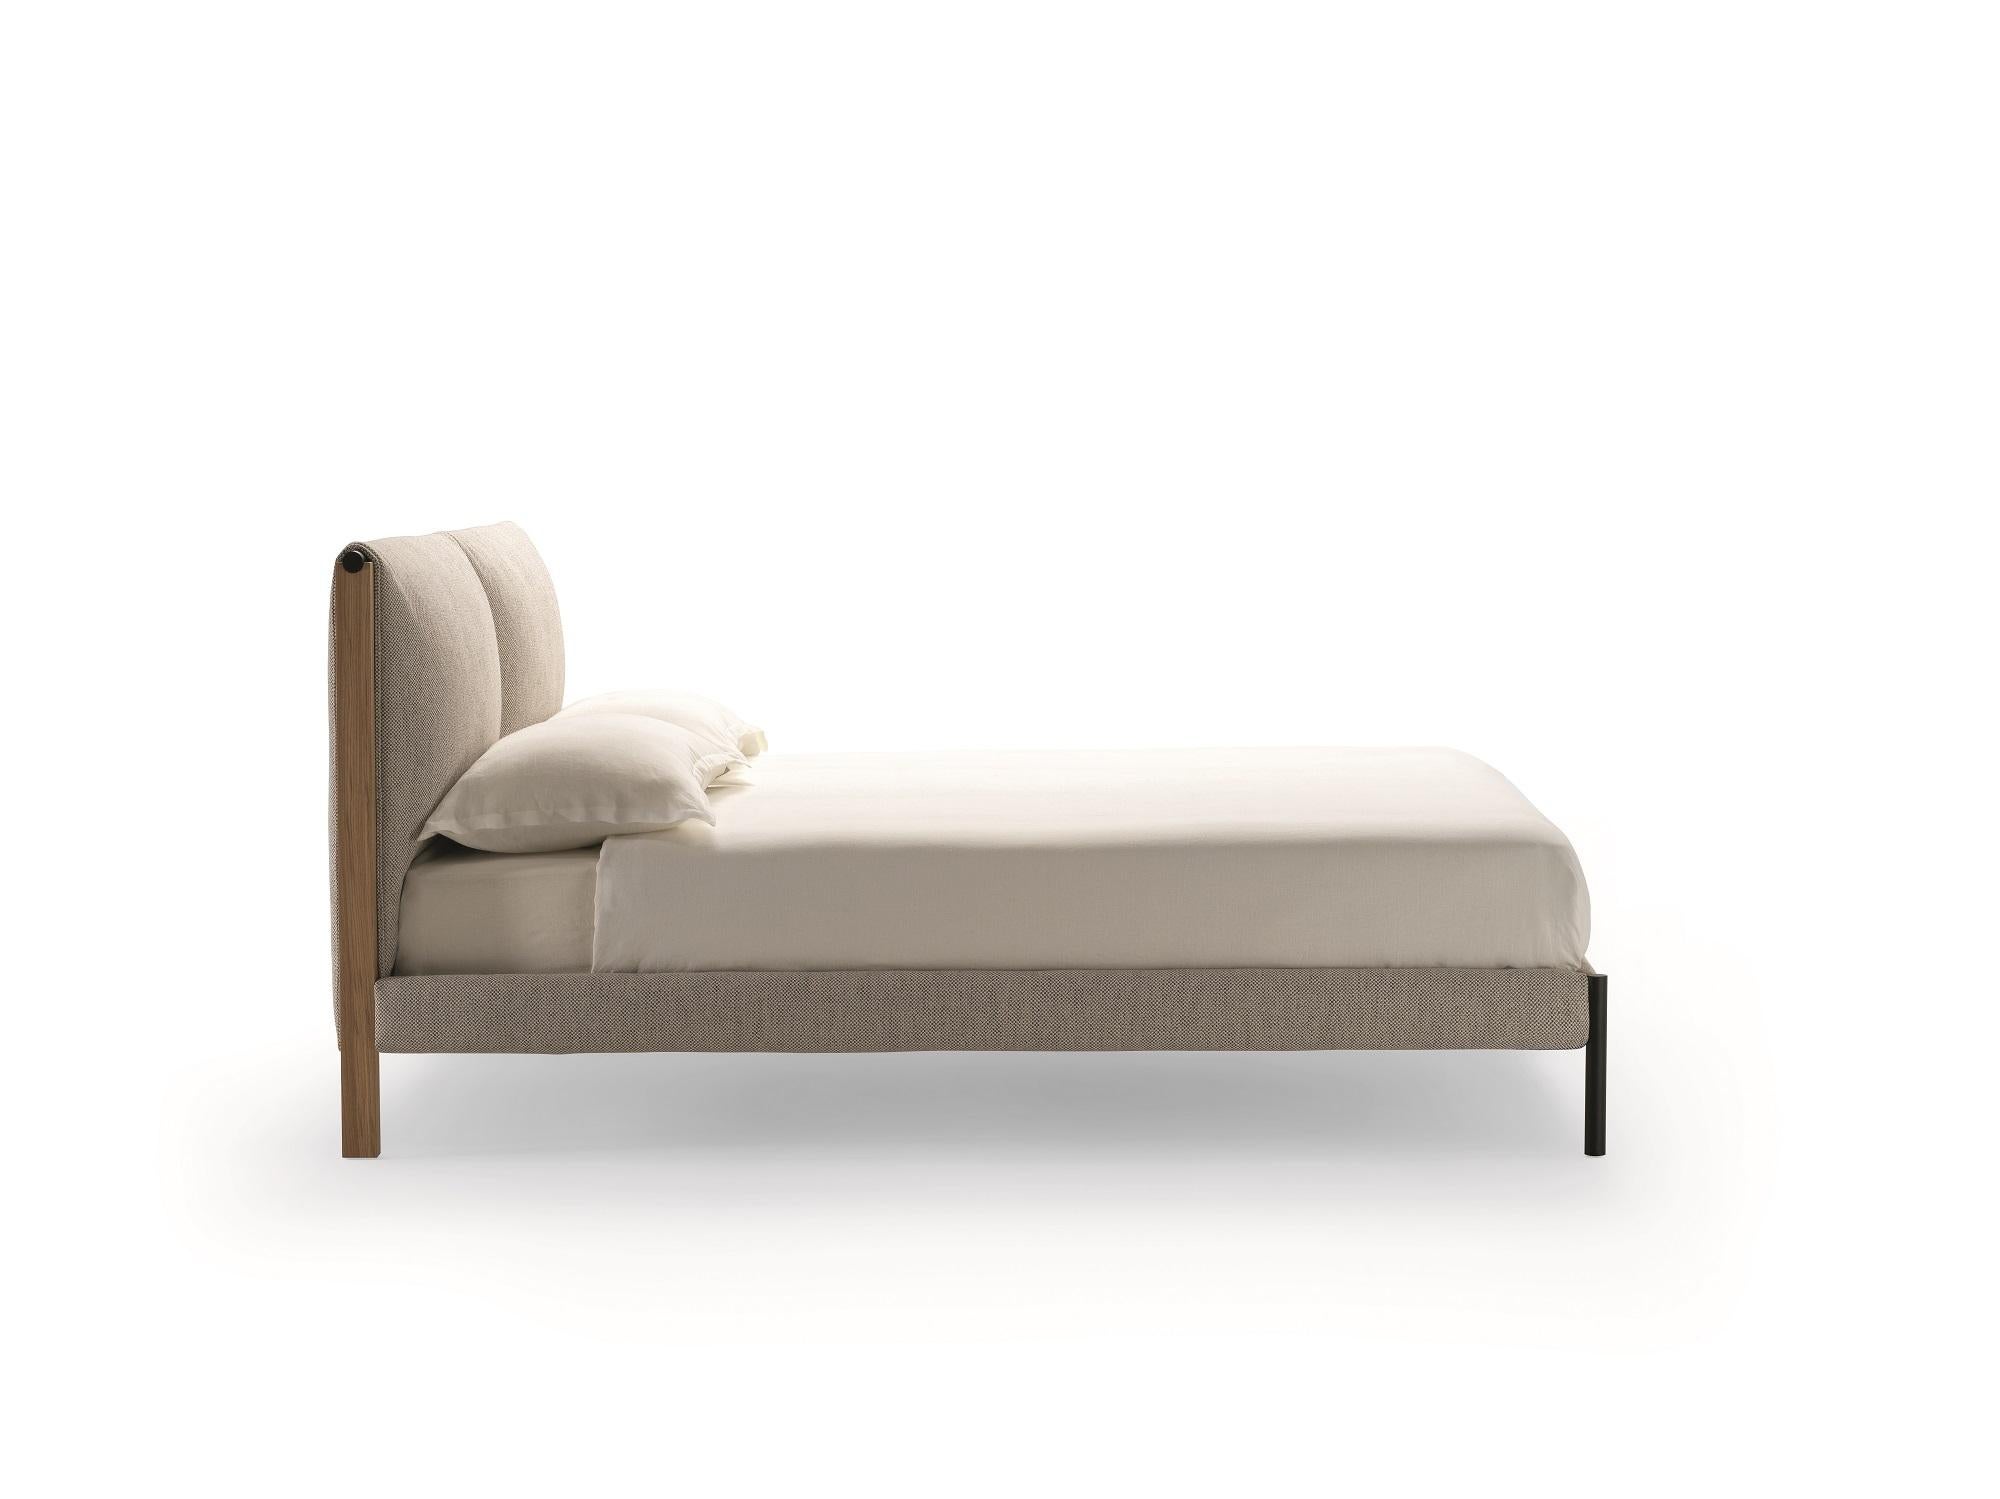 Zanotta Medium Ricordi Bed with Separate Springing in Toce Upholstery by Spalvieri & Del Ciotto

Bed with separate springing. Headboard frame in natural or in open pore black painted oak. Upholstery in polyurethane/heat-bound polyester fibre.